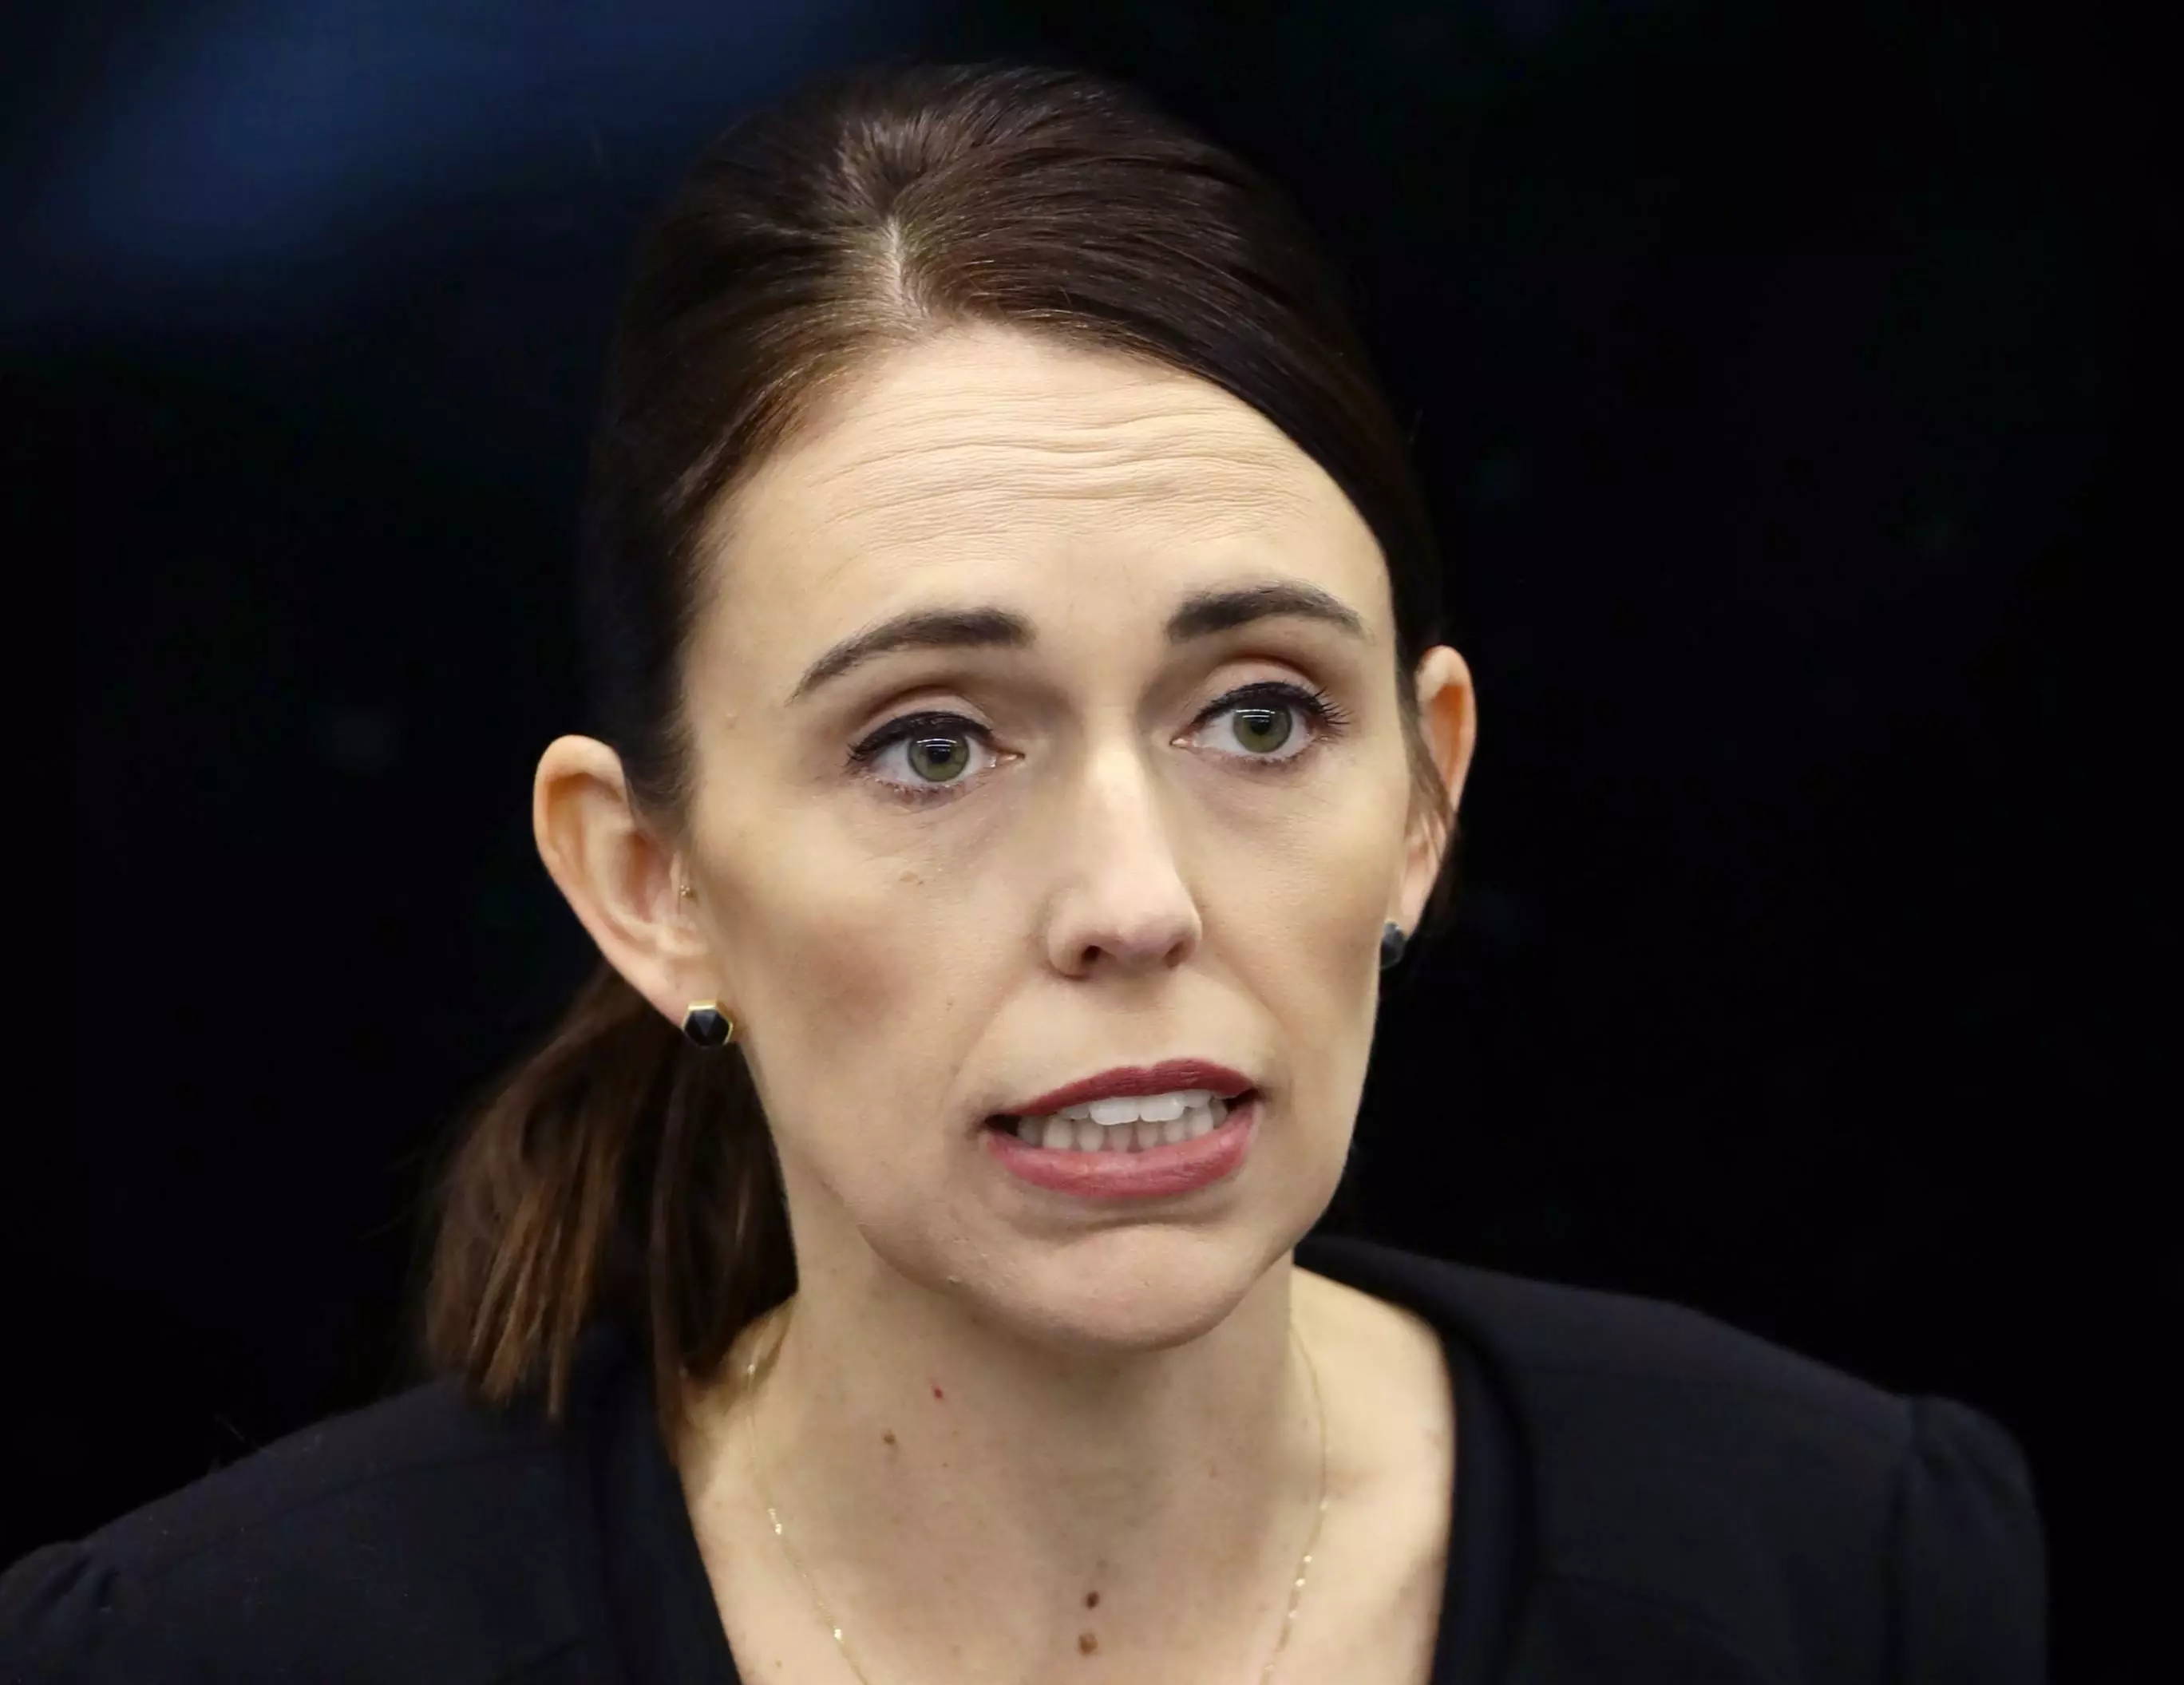 Mrs Ardern announcing the weapons ban.